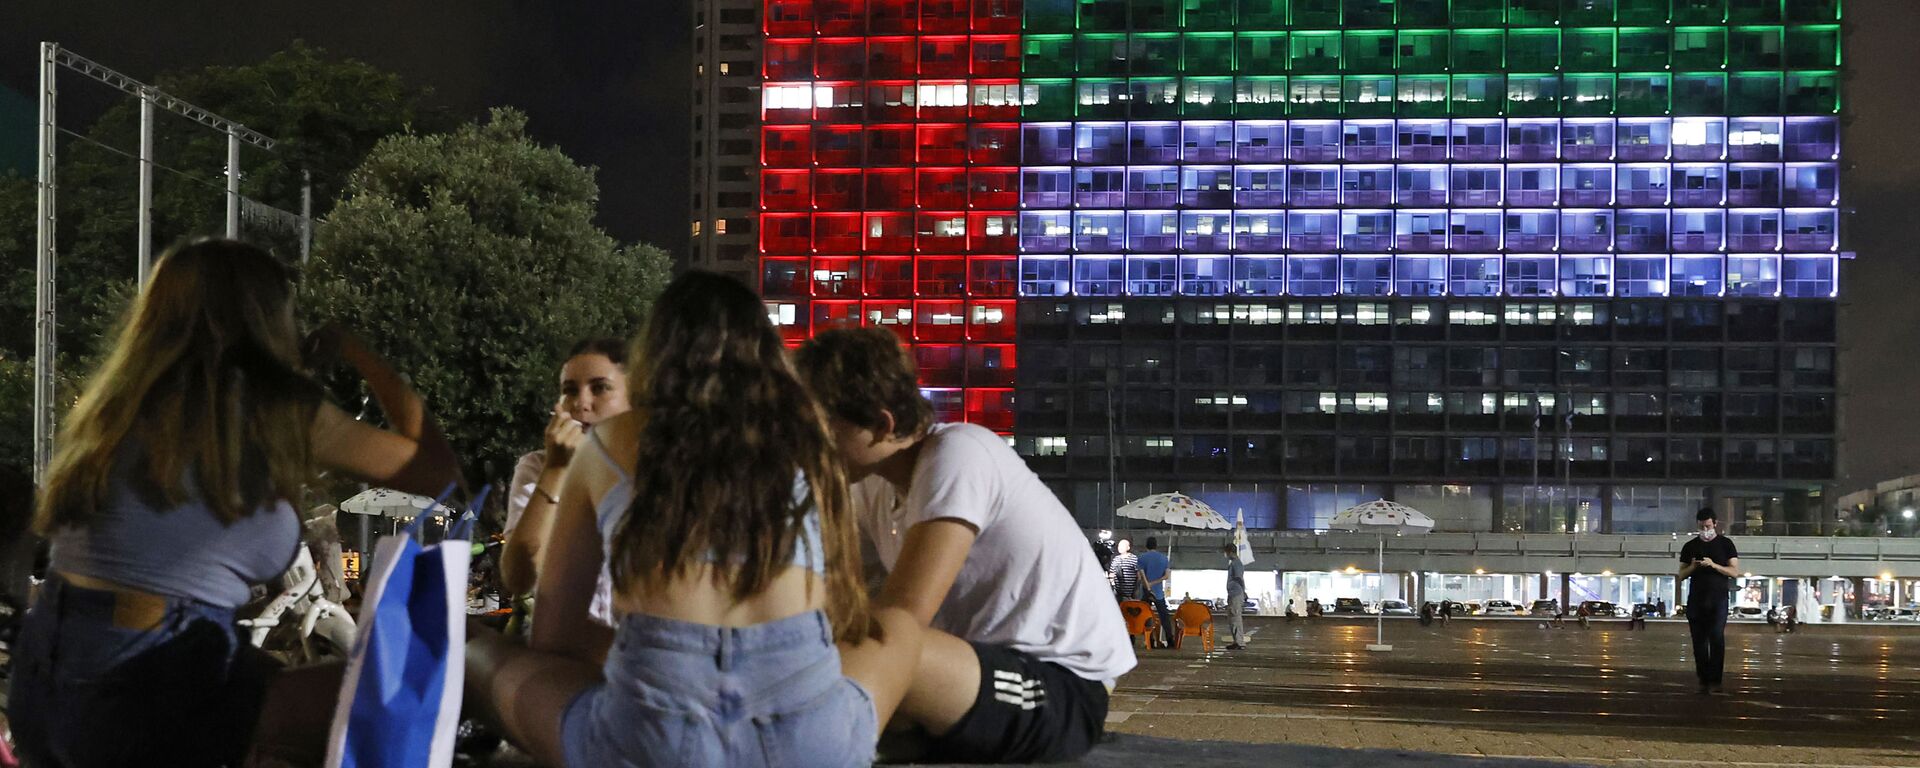 City hall in the Israeli coastal city of Tel Aviv is lit up in the colours of the United Arab Emirates' national flag on 13 August 2020. Israel and the UAE agreed to normalise relations in a landmark US-brokered deal, only the third such accord the Jewish state has struck with an Arab nation. The agreement, first announced by US President Donald Trump on Twitter, will see Israel halt its plan to annex large parts of the occupied West Bank, according to the UAE. - Sputnik International, 1920, 03.09.2020